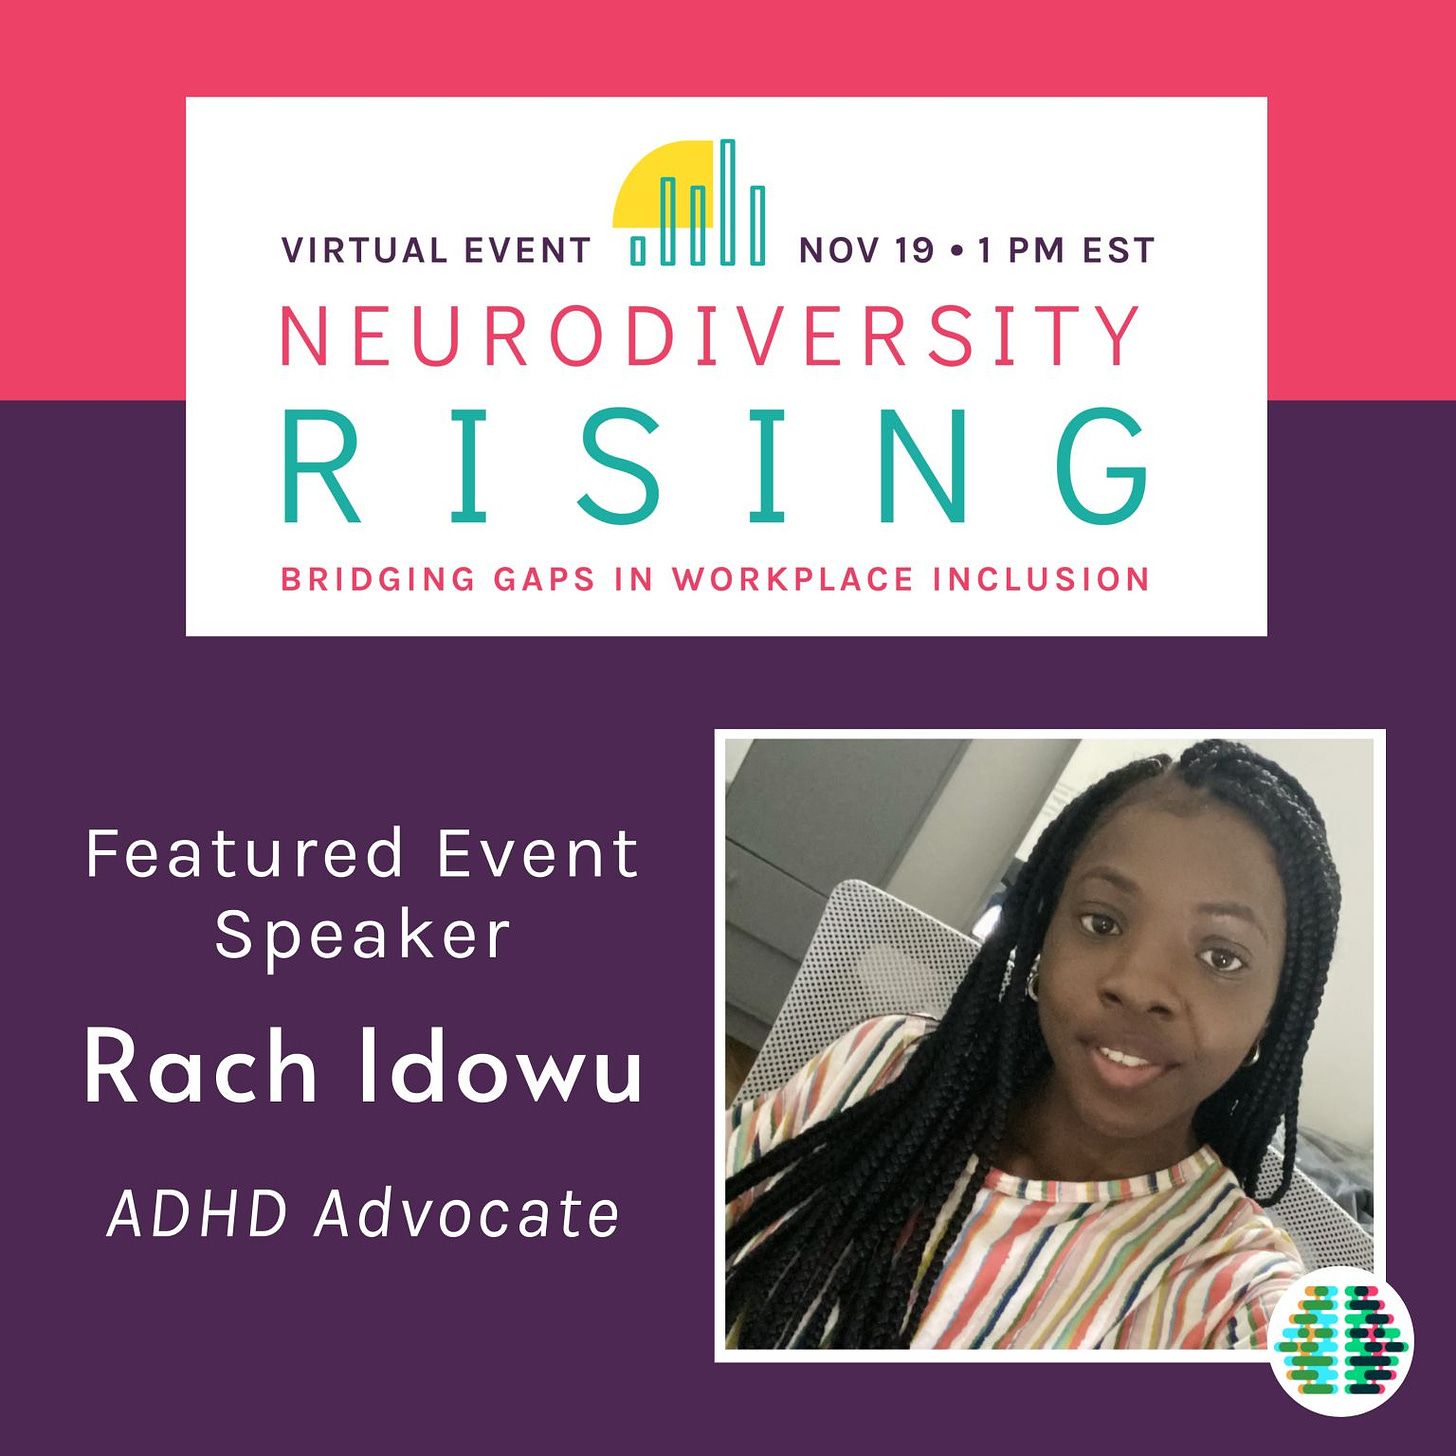 The event flyer for Neurodiversity In The Workplace event on ‘Neurodiversity Rising: Bridging Gaps in Workplace Inclusion’. The flyer is pink and purple and includes a picture of me. 